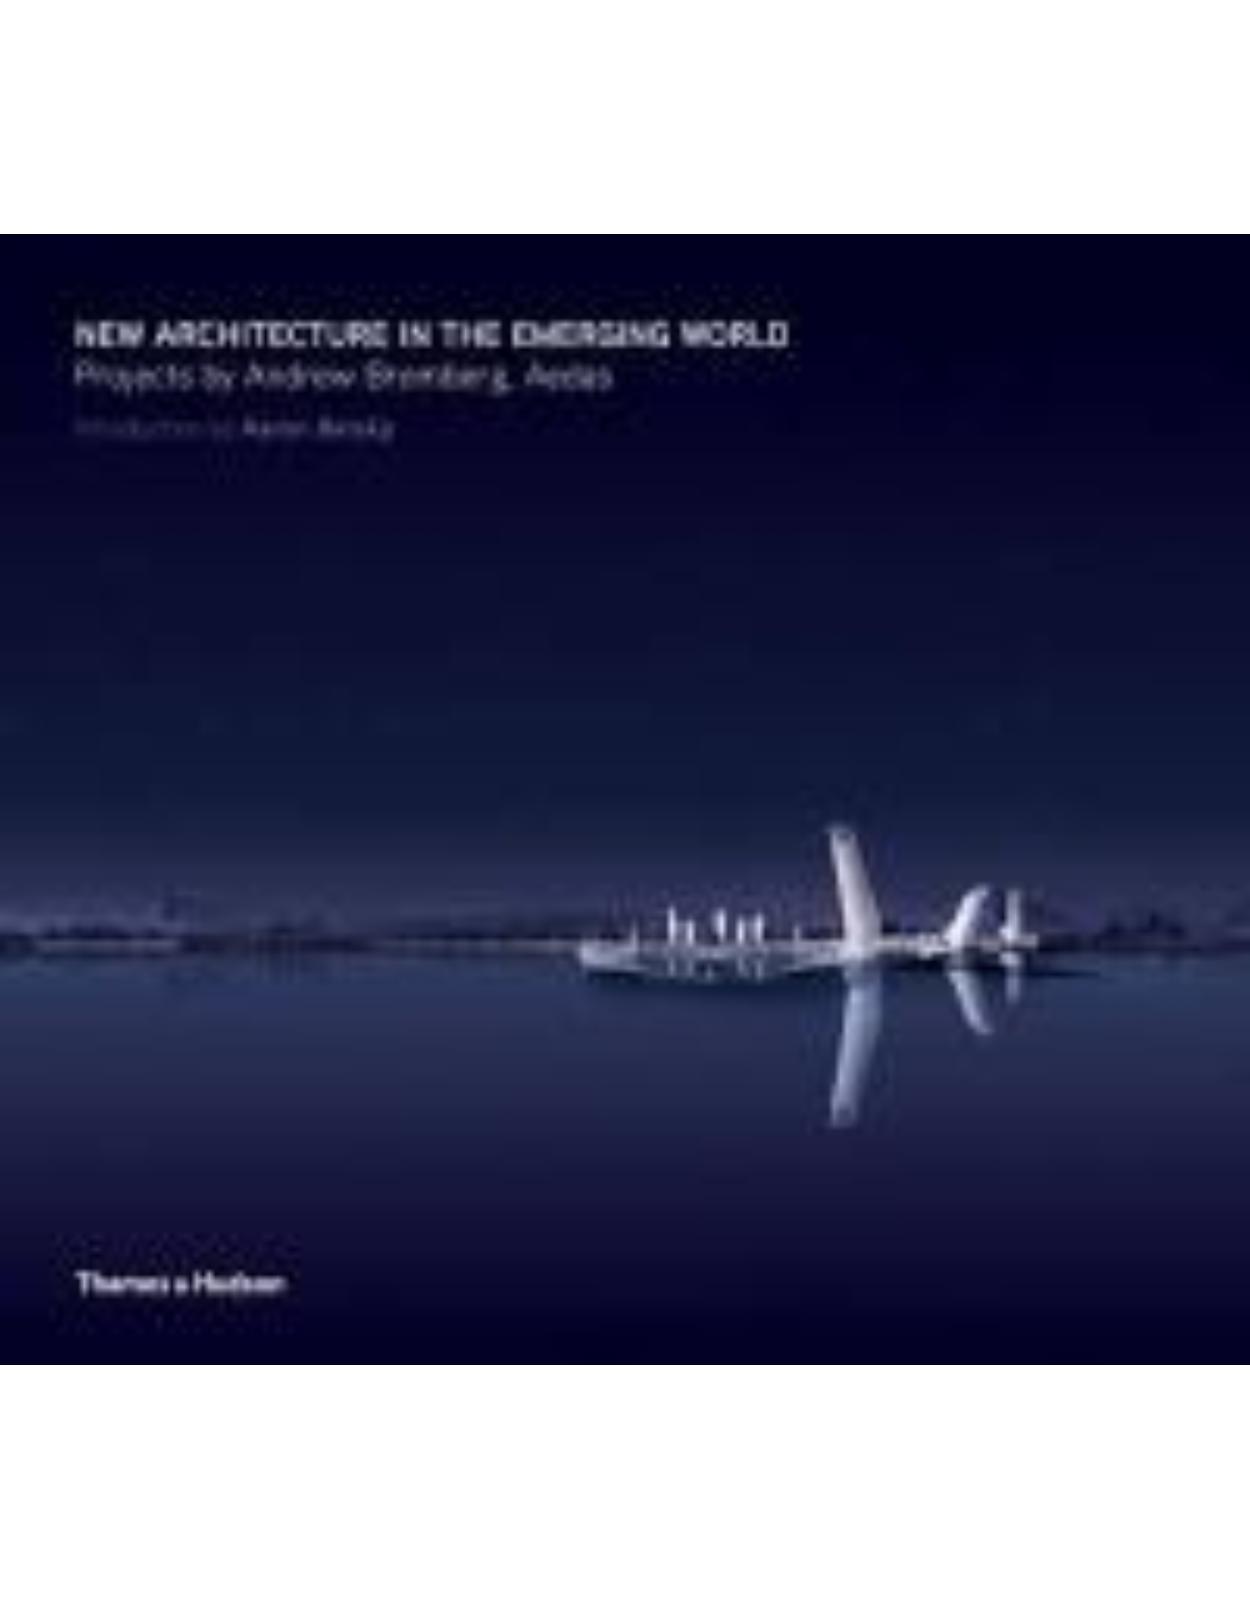 New Architecture in the Emerging World: The Projects of Andrew Bromberg, AEDAS